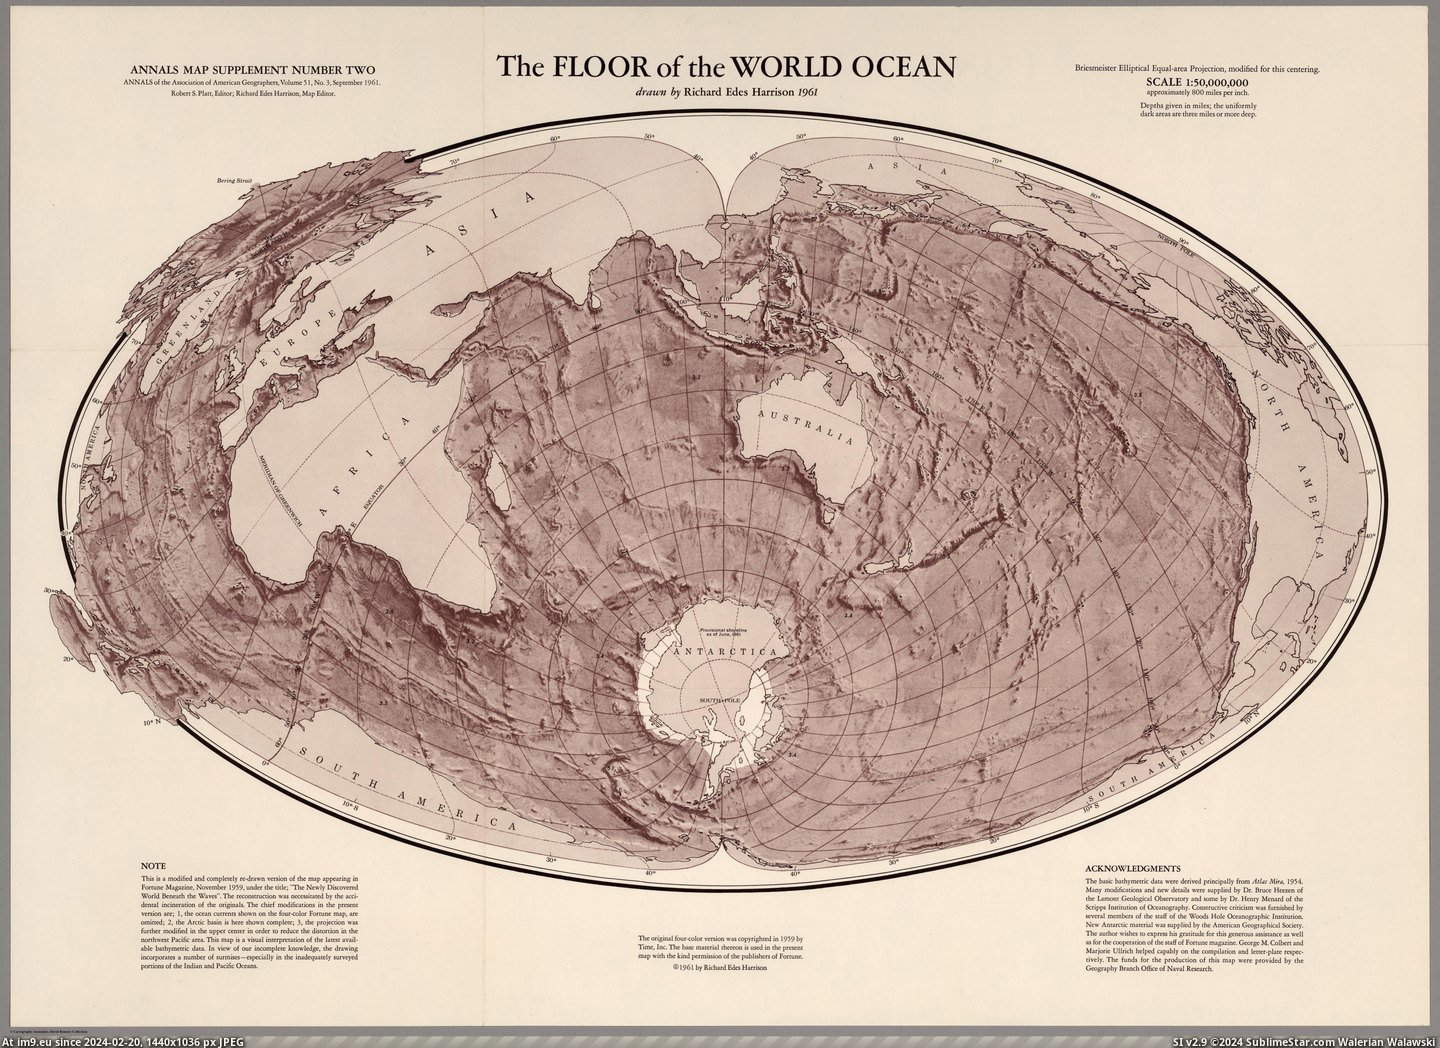 #World #Area #Ocean #Harrison #Equal #Floor #Richard #Projection [Mapporn] The Floor of the World Ocean, a Briesmeister Elliptical Equal-area Projection, made in 1961 by Richard Edes Harrison [ Pic. (Image of album My r/MAPS favs))